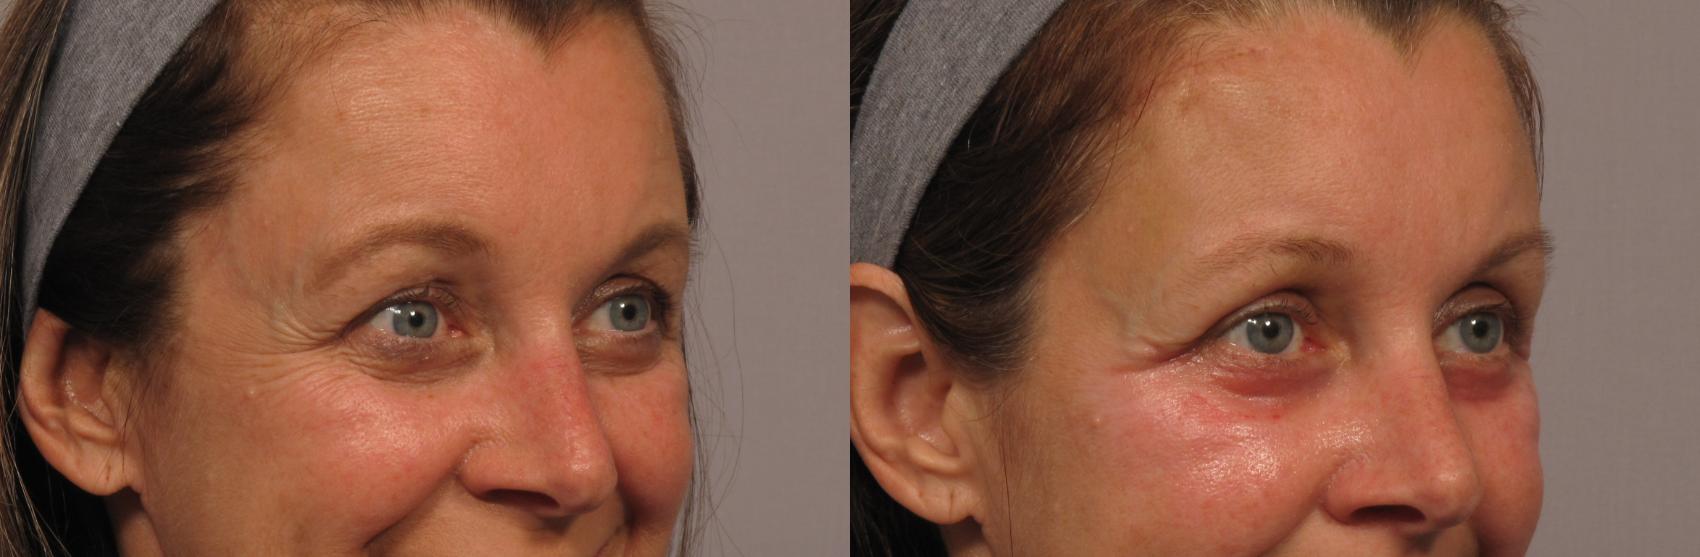 Before and 3 Weeks After Eye lid Lift and Brow Lift, Right Oblique - Smiling View